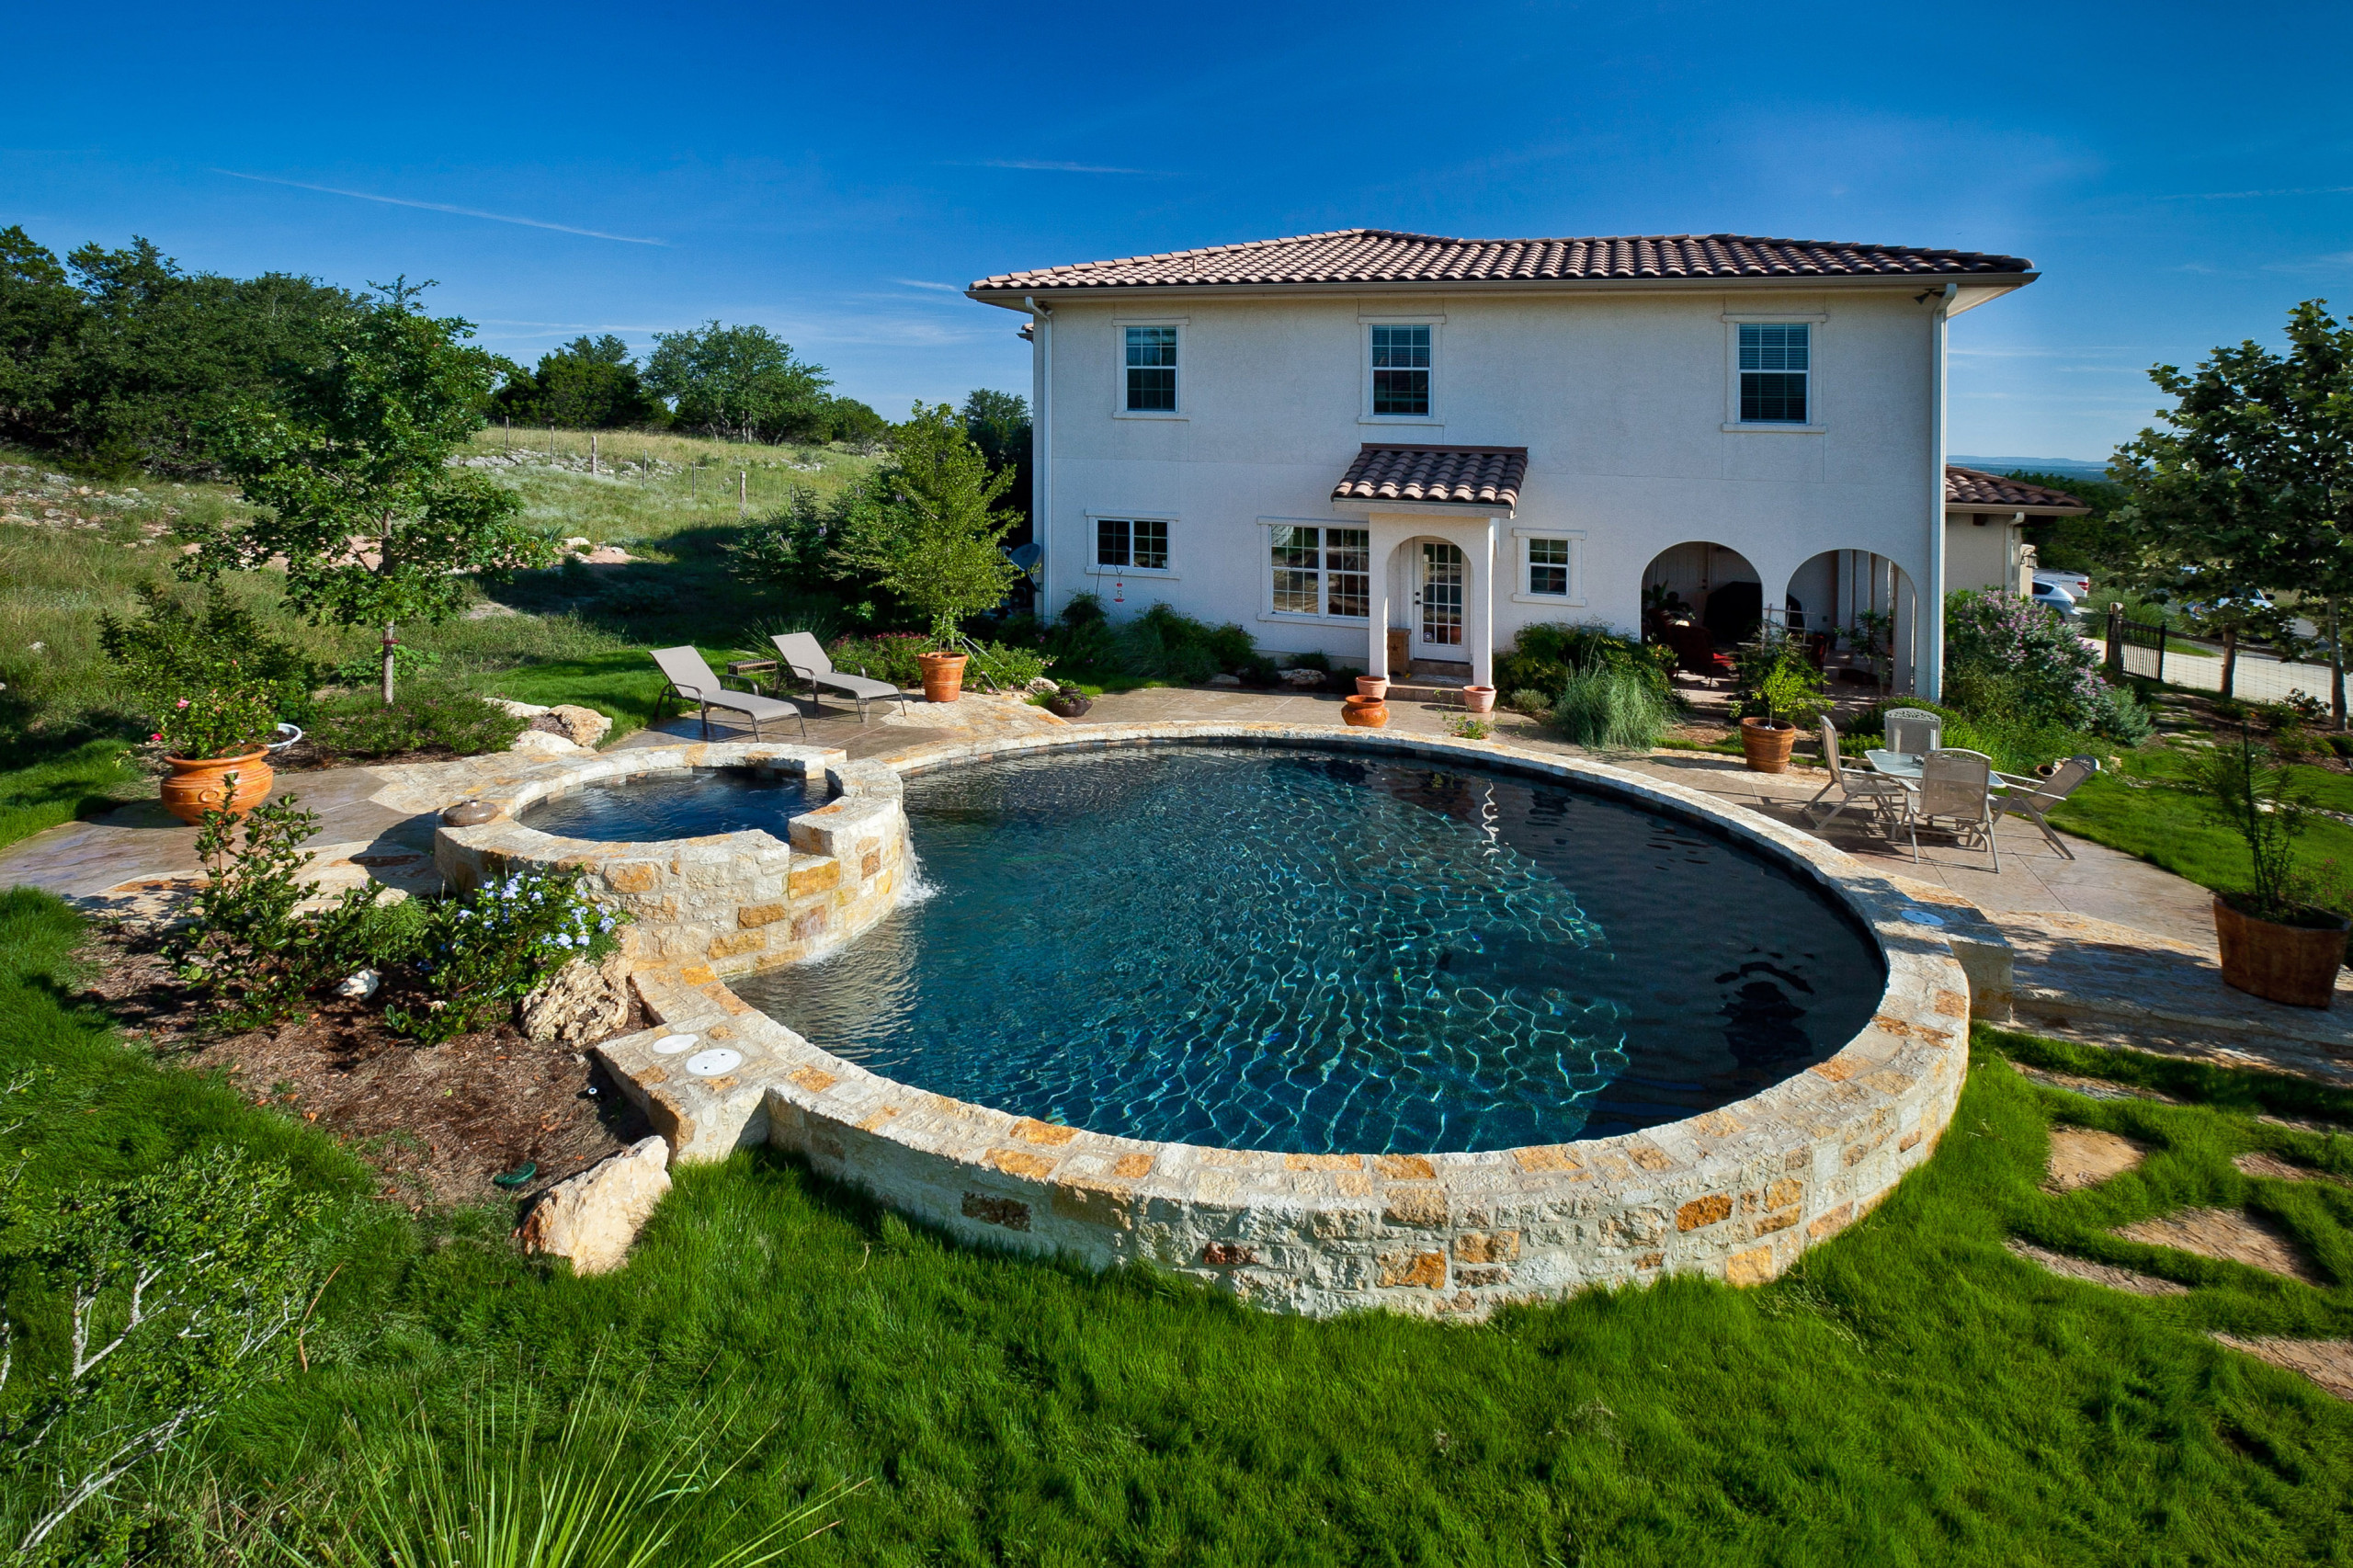 Cordillera Ranch/Boerne, Texas Round pool with Raised Spa and Pool Deck